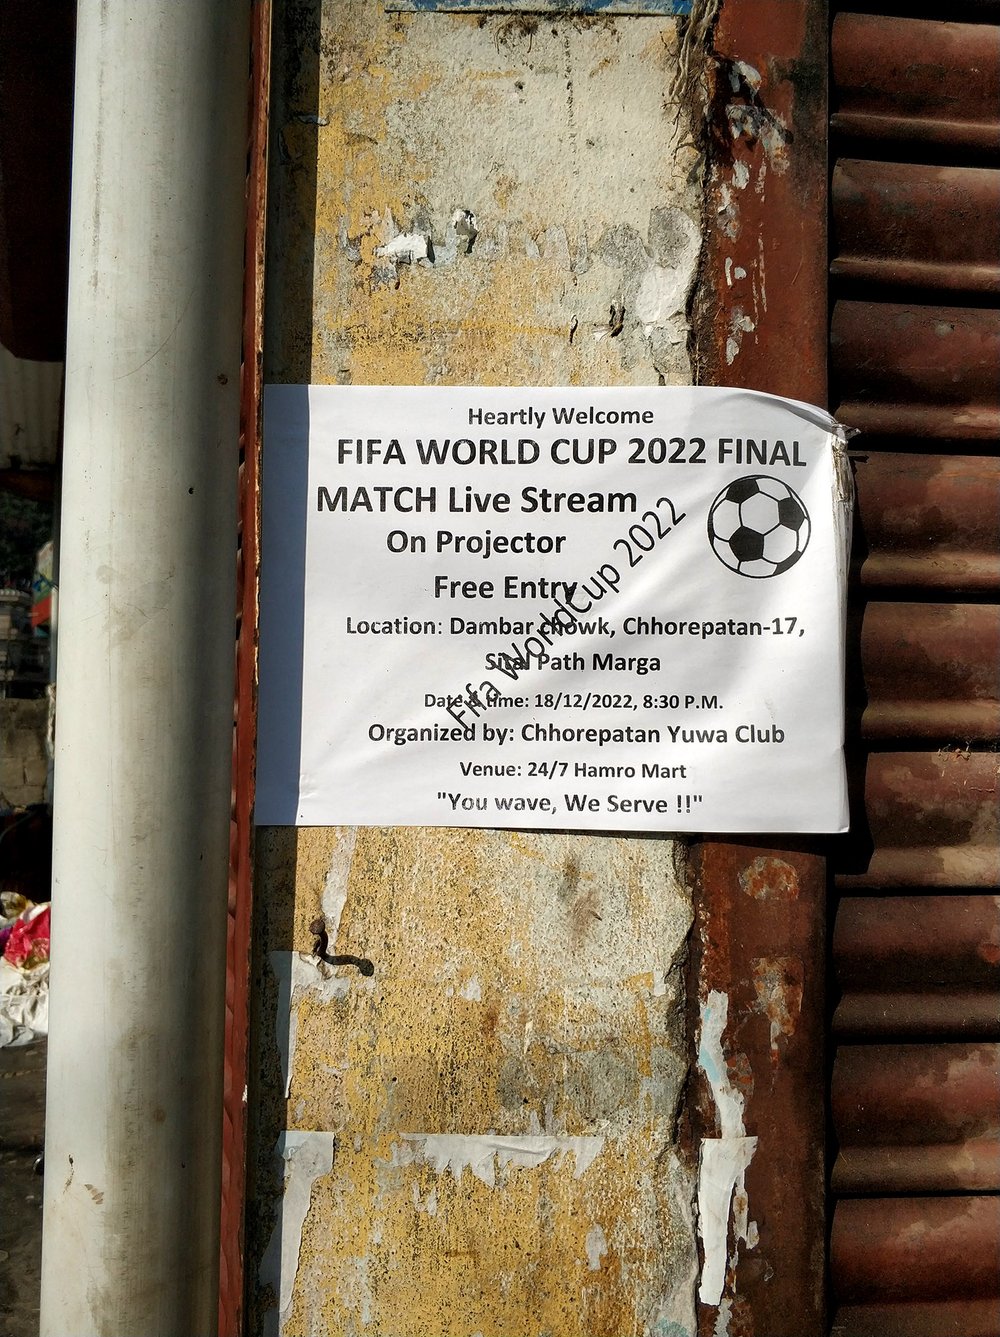  Hindsight is 20/20, but it's a shame we hadn't seen these signs around town, or we definitely would've watched the match at Dambar Chowk 